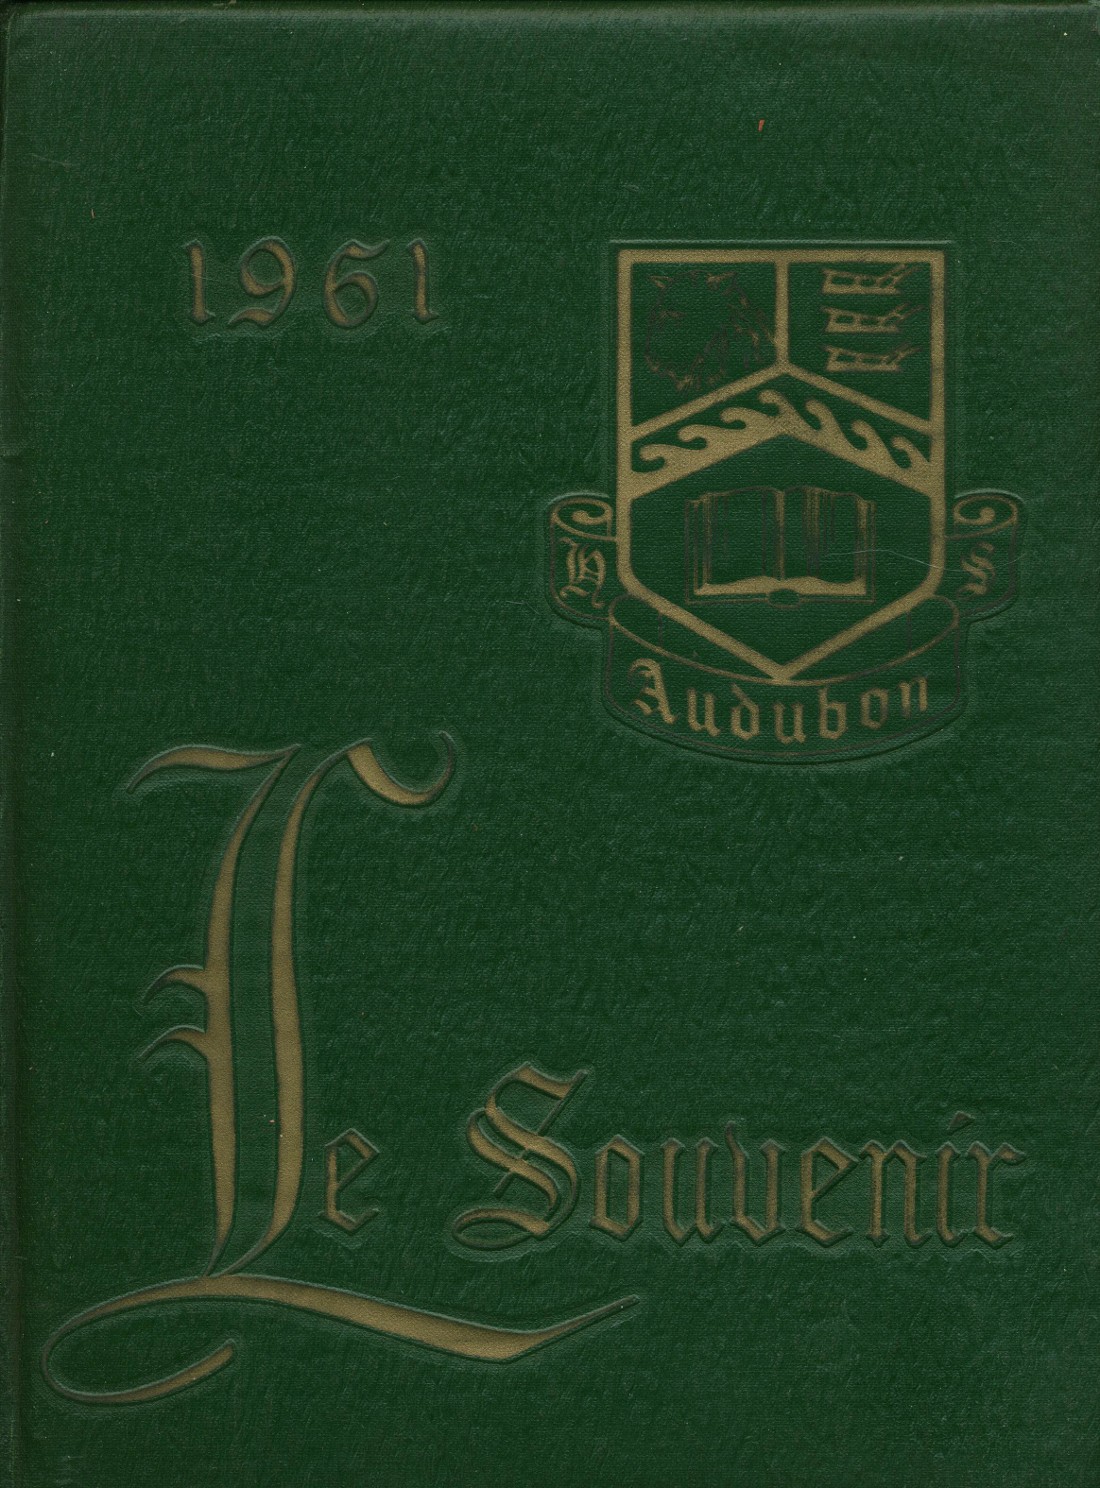 1961 yearbook from Audubon High School from Audubon, New Jersey for sale